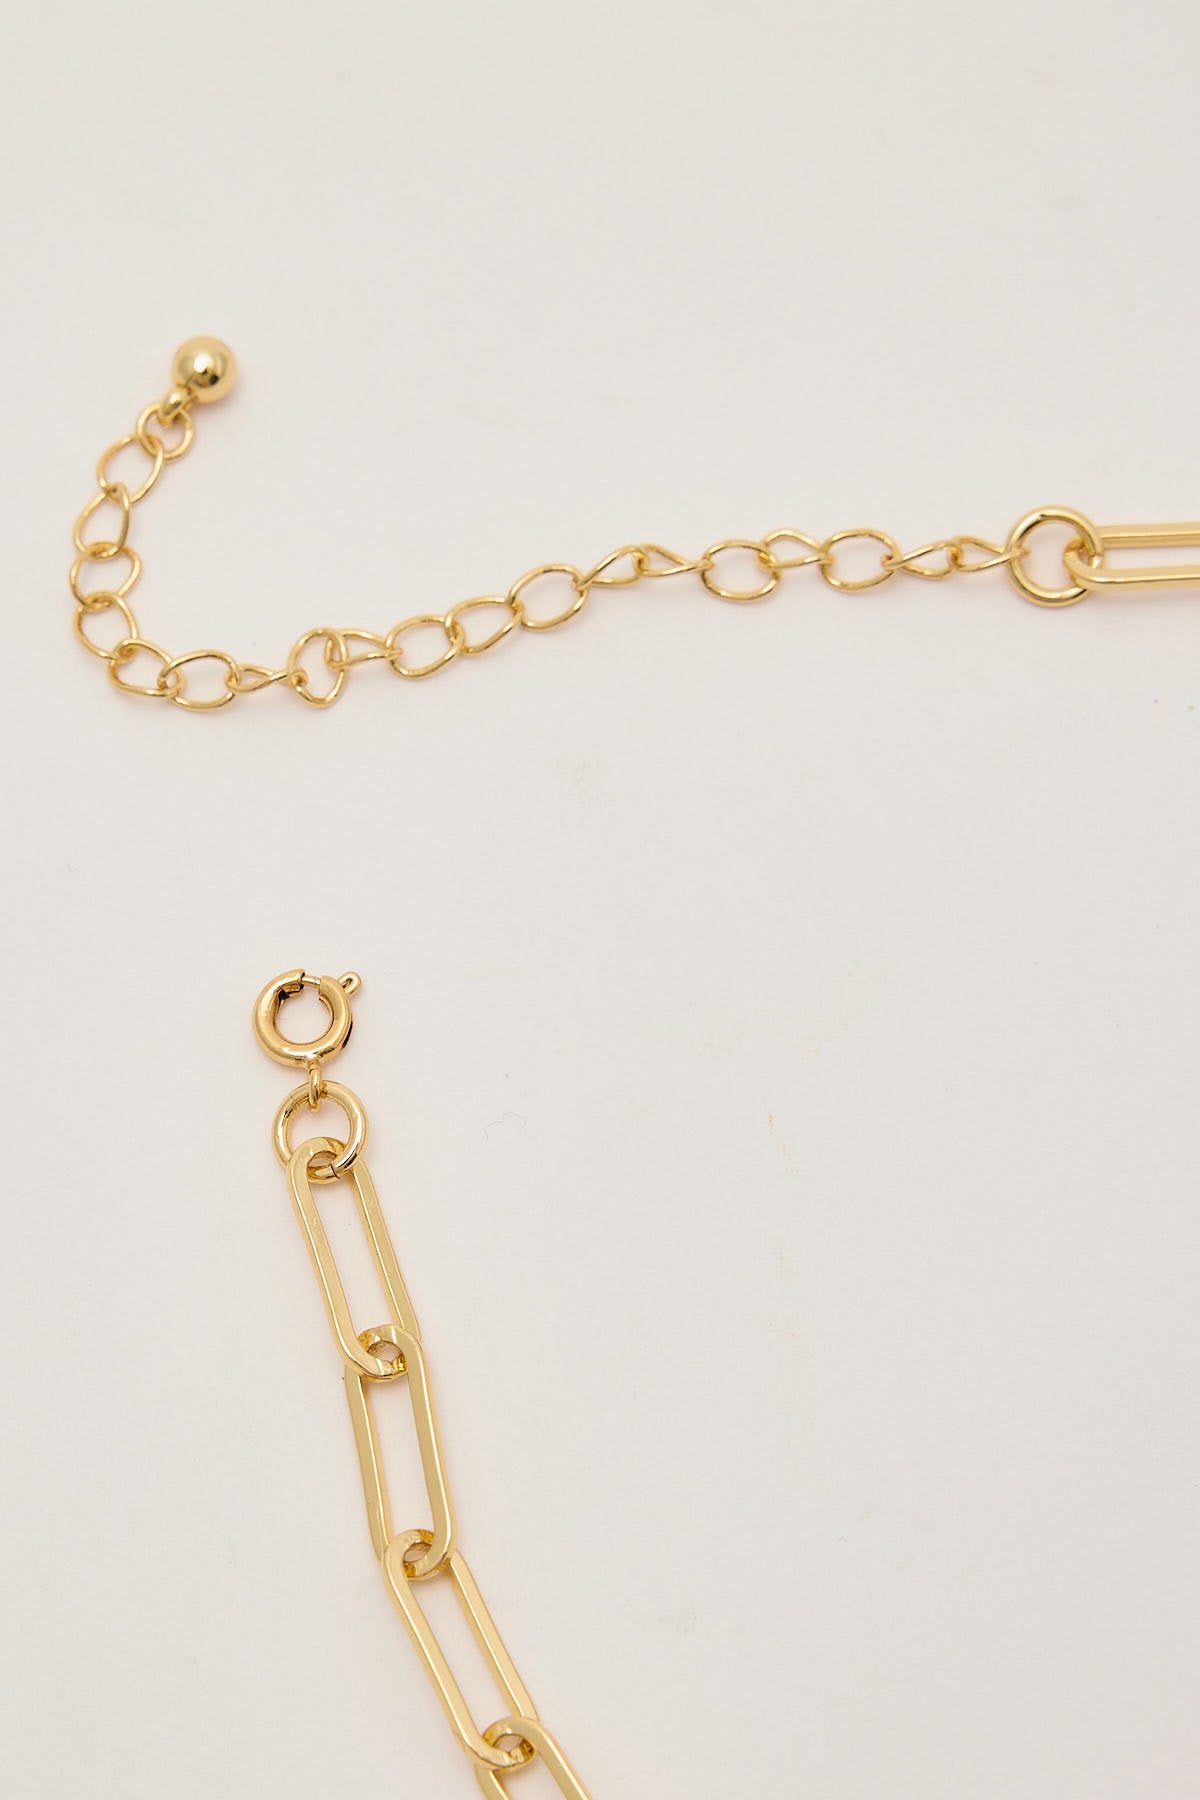 Perfect Stranger Clementine Paperclip Necklace Gold